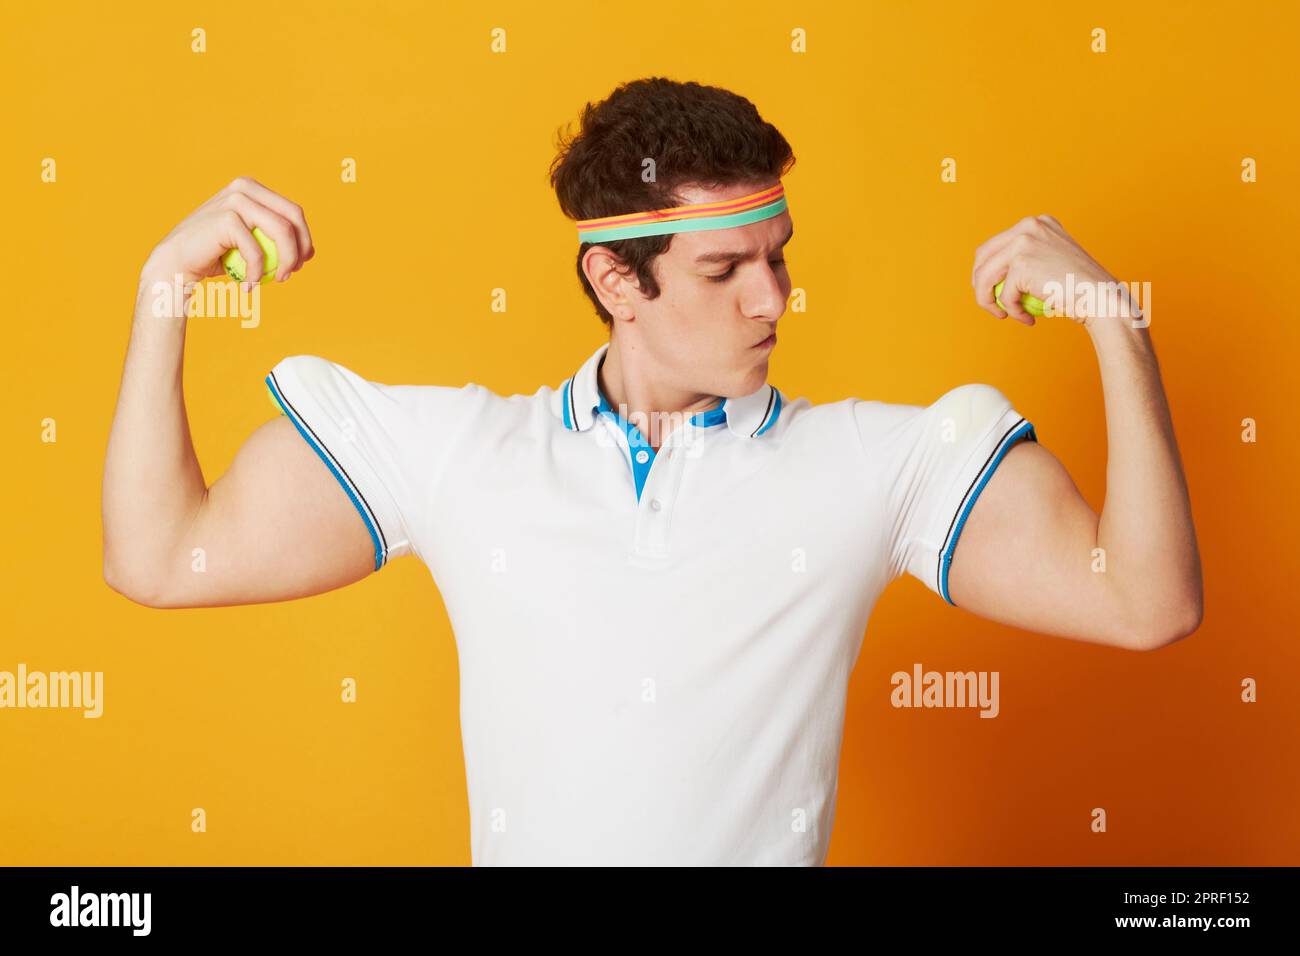 My muscles are real, I swear. A caucasian male using tennis balls as muscle  for his arms while pulling a silly pose in tennis wear Stock Photo - Alamy